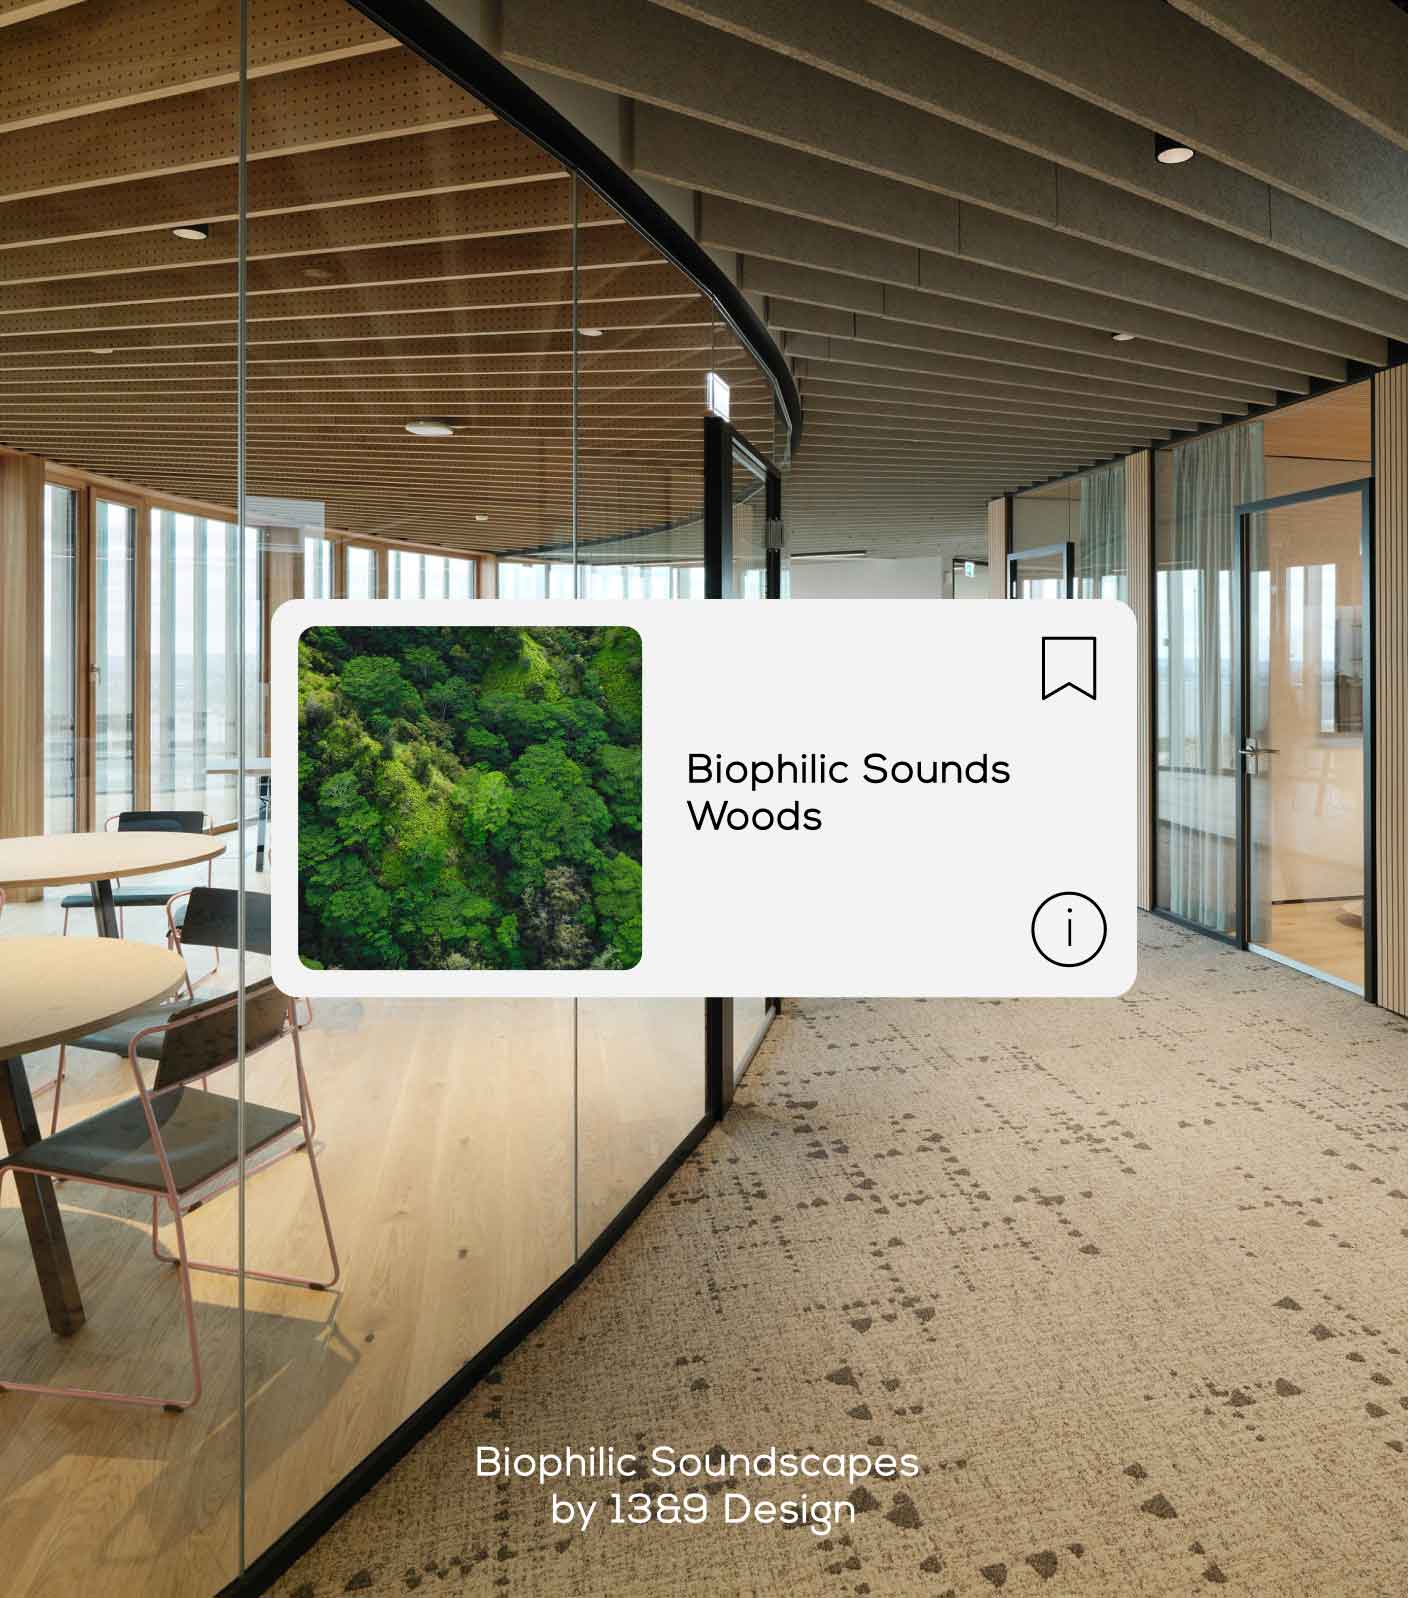 A user interface element showing the biophilic sounds channel placed on a mood image of a modern office space.